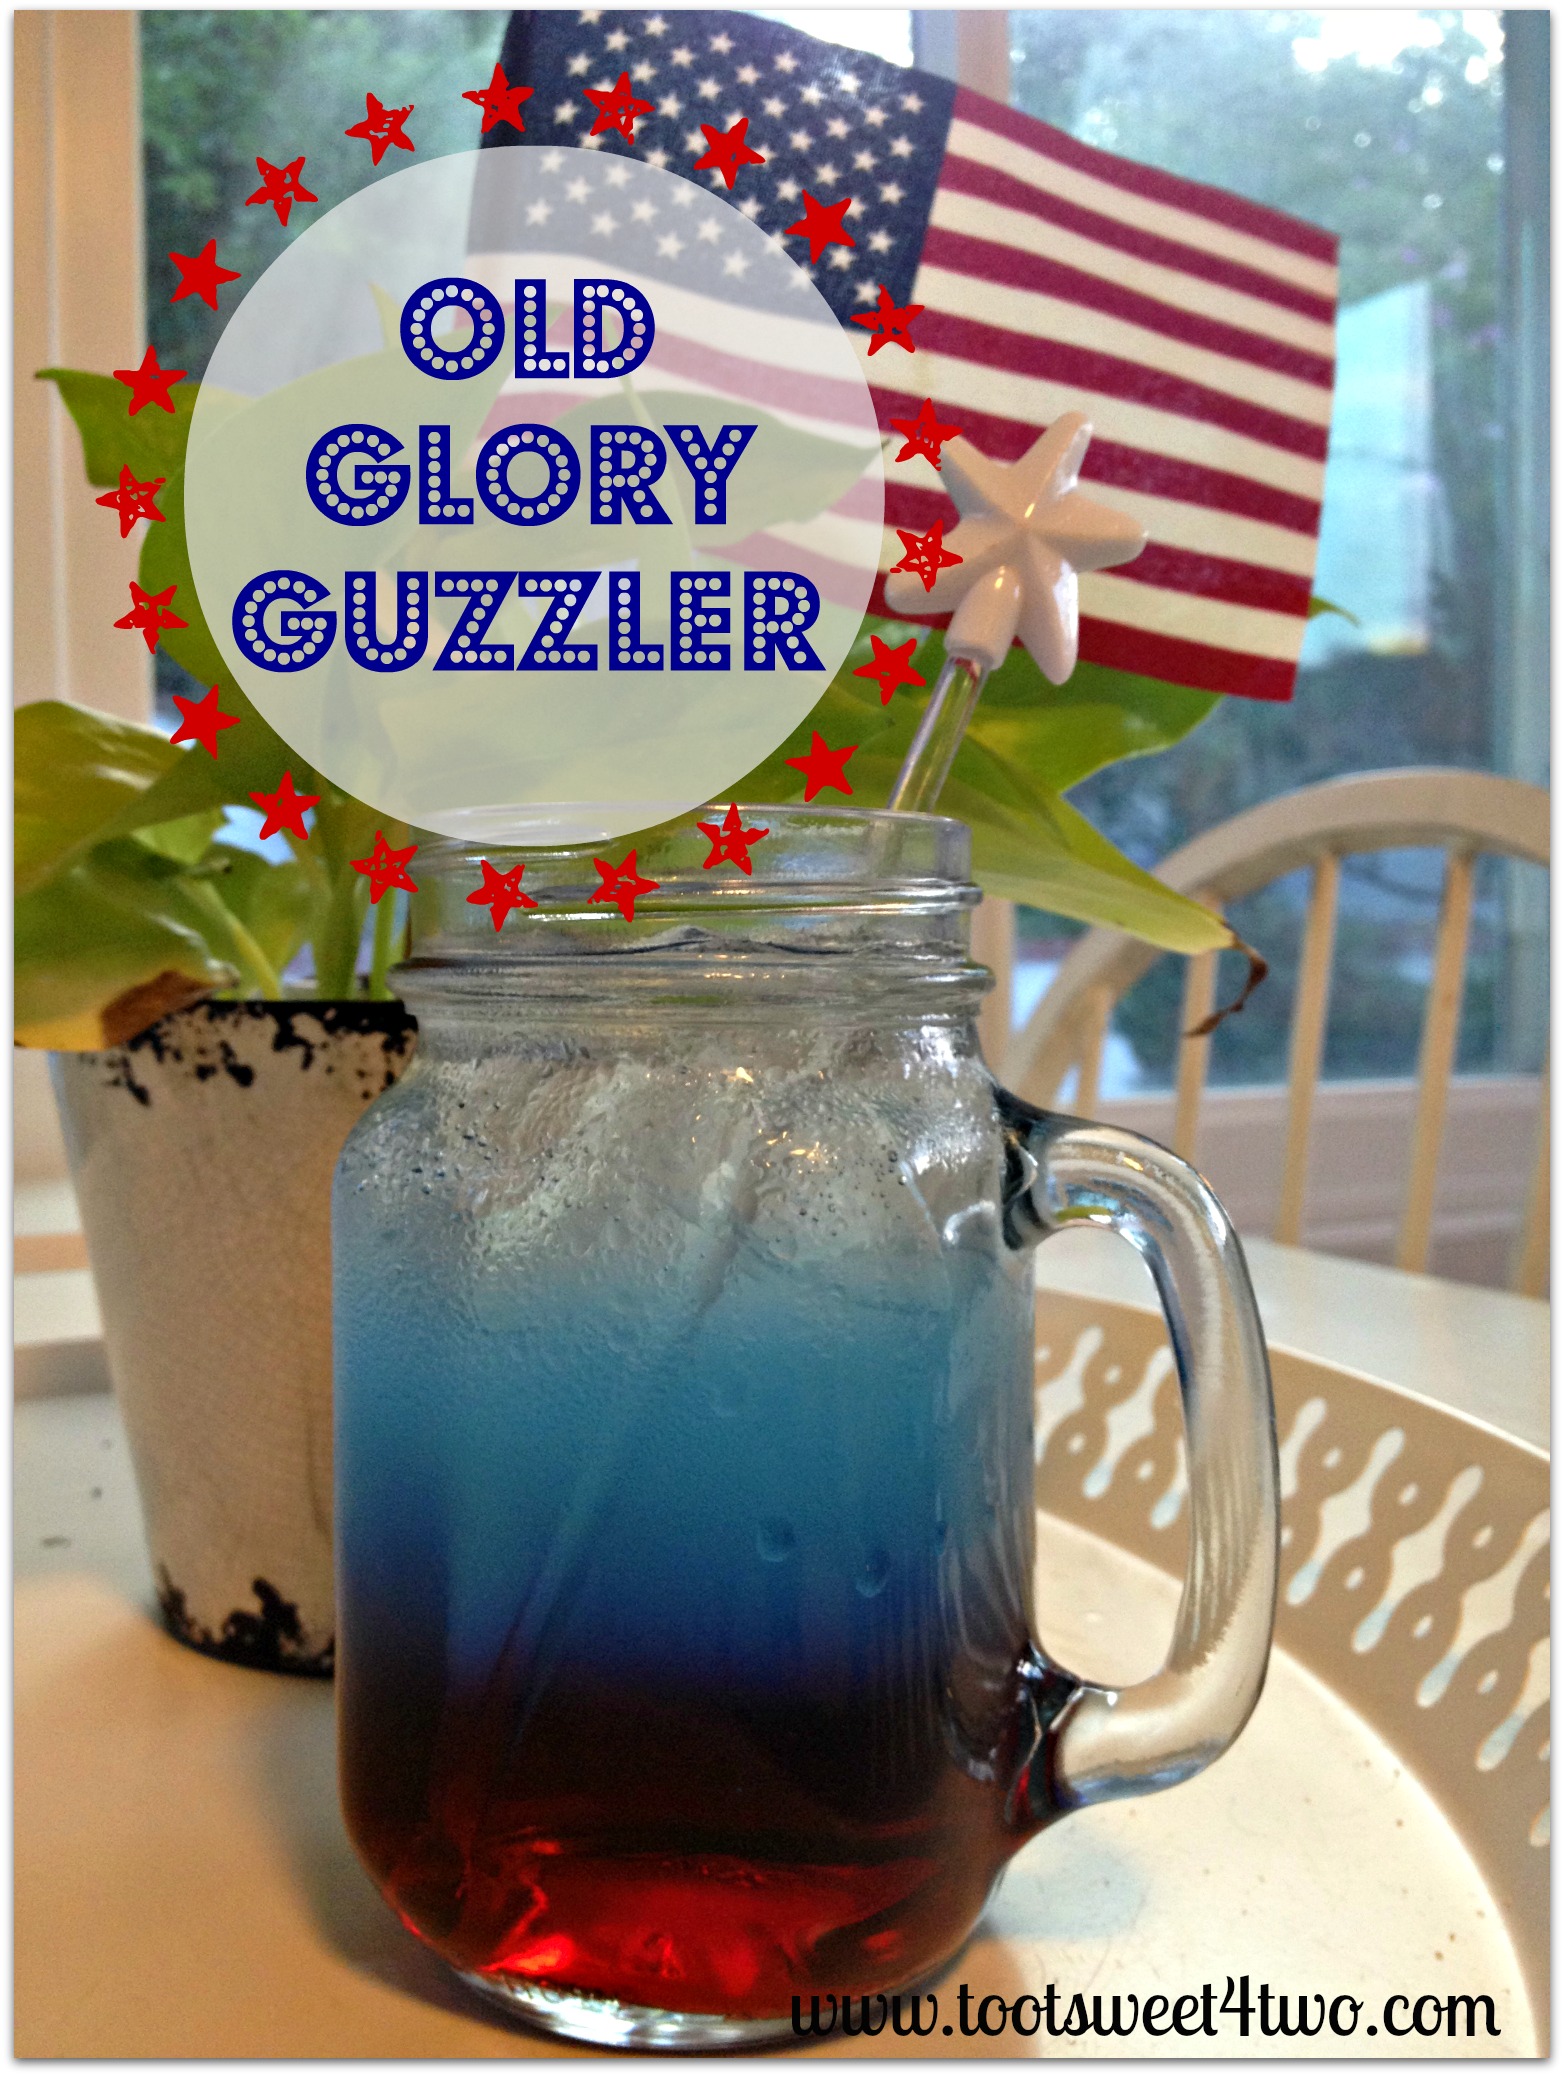 Color It Red, White & Blue Old Glory Guzzler